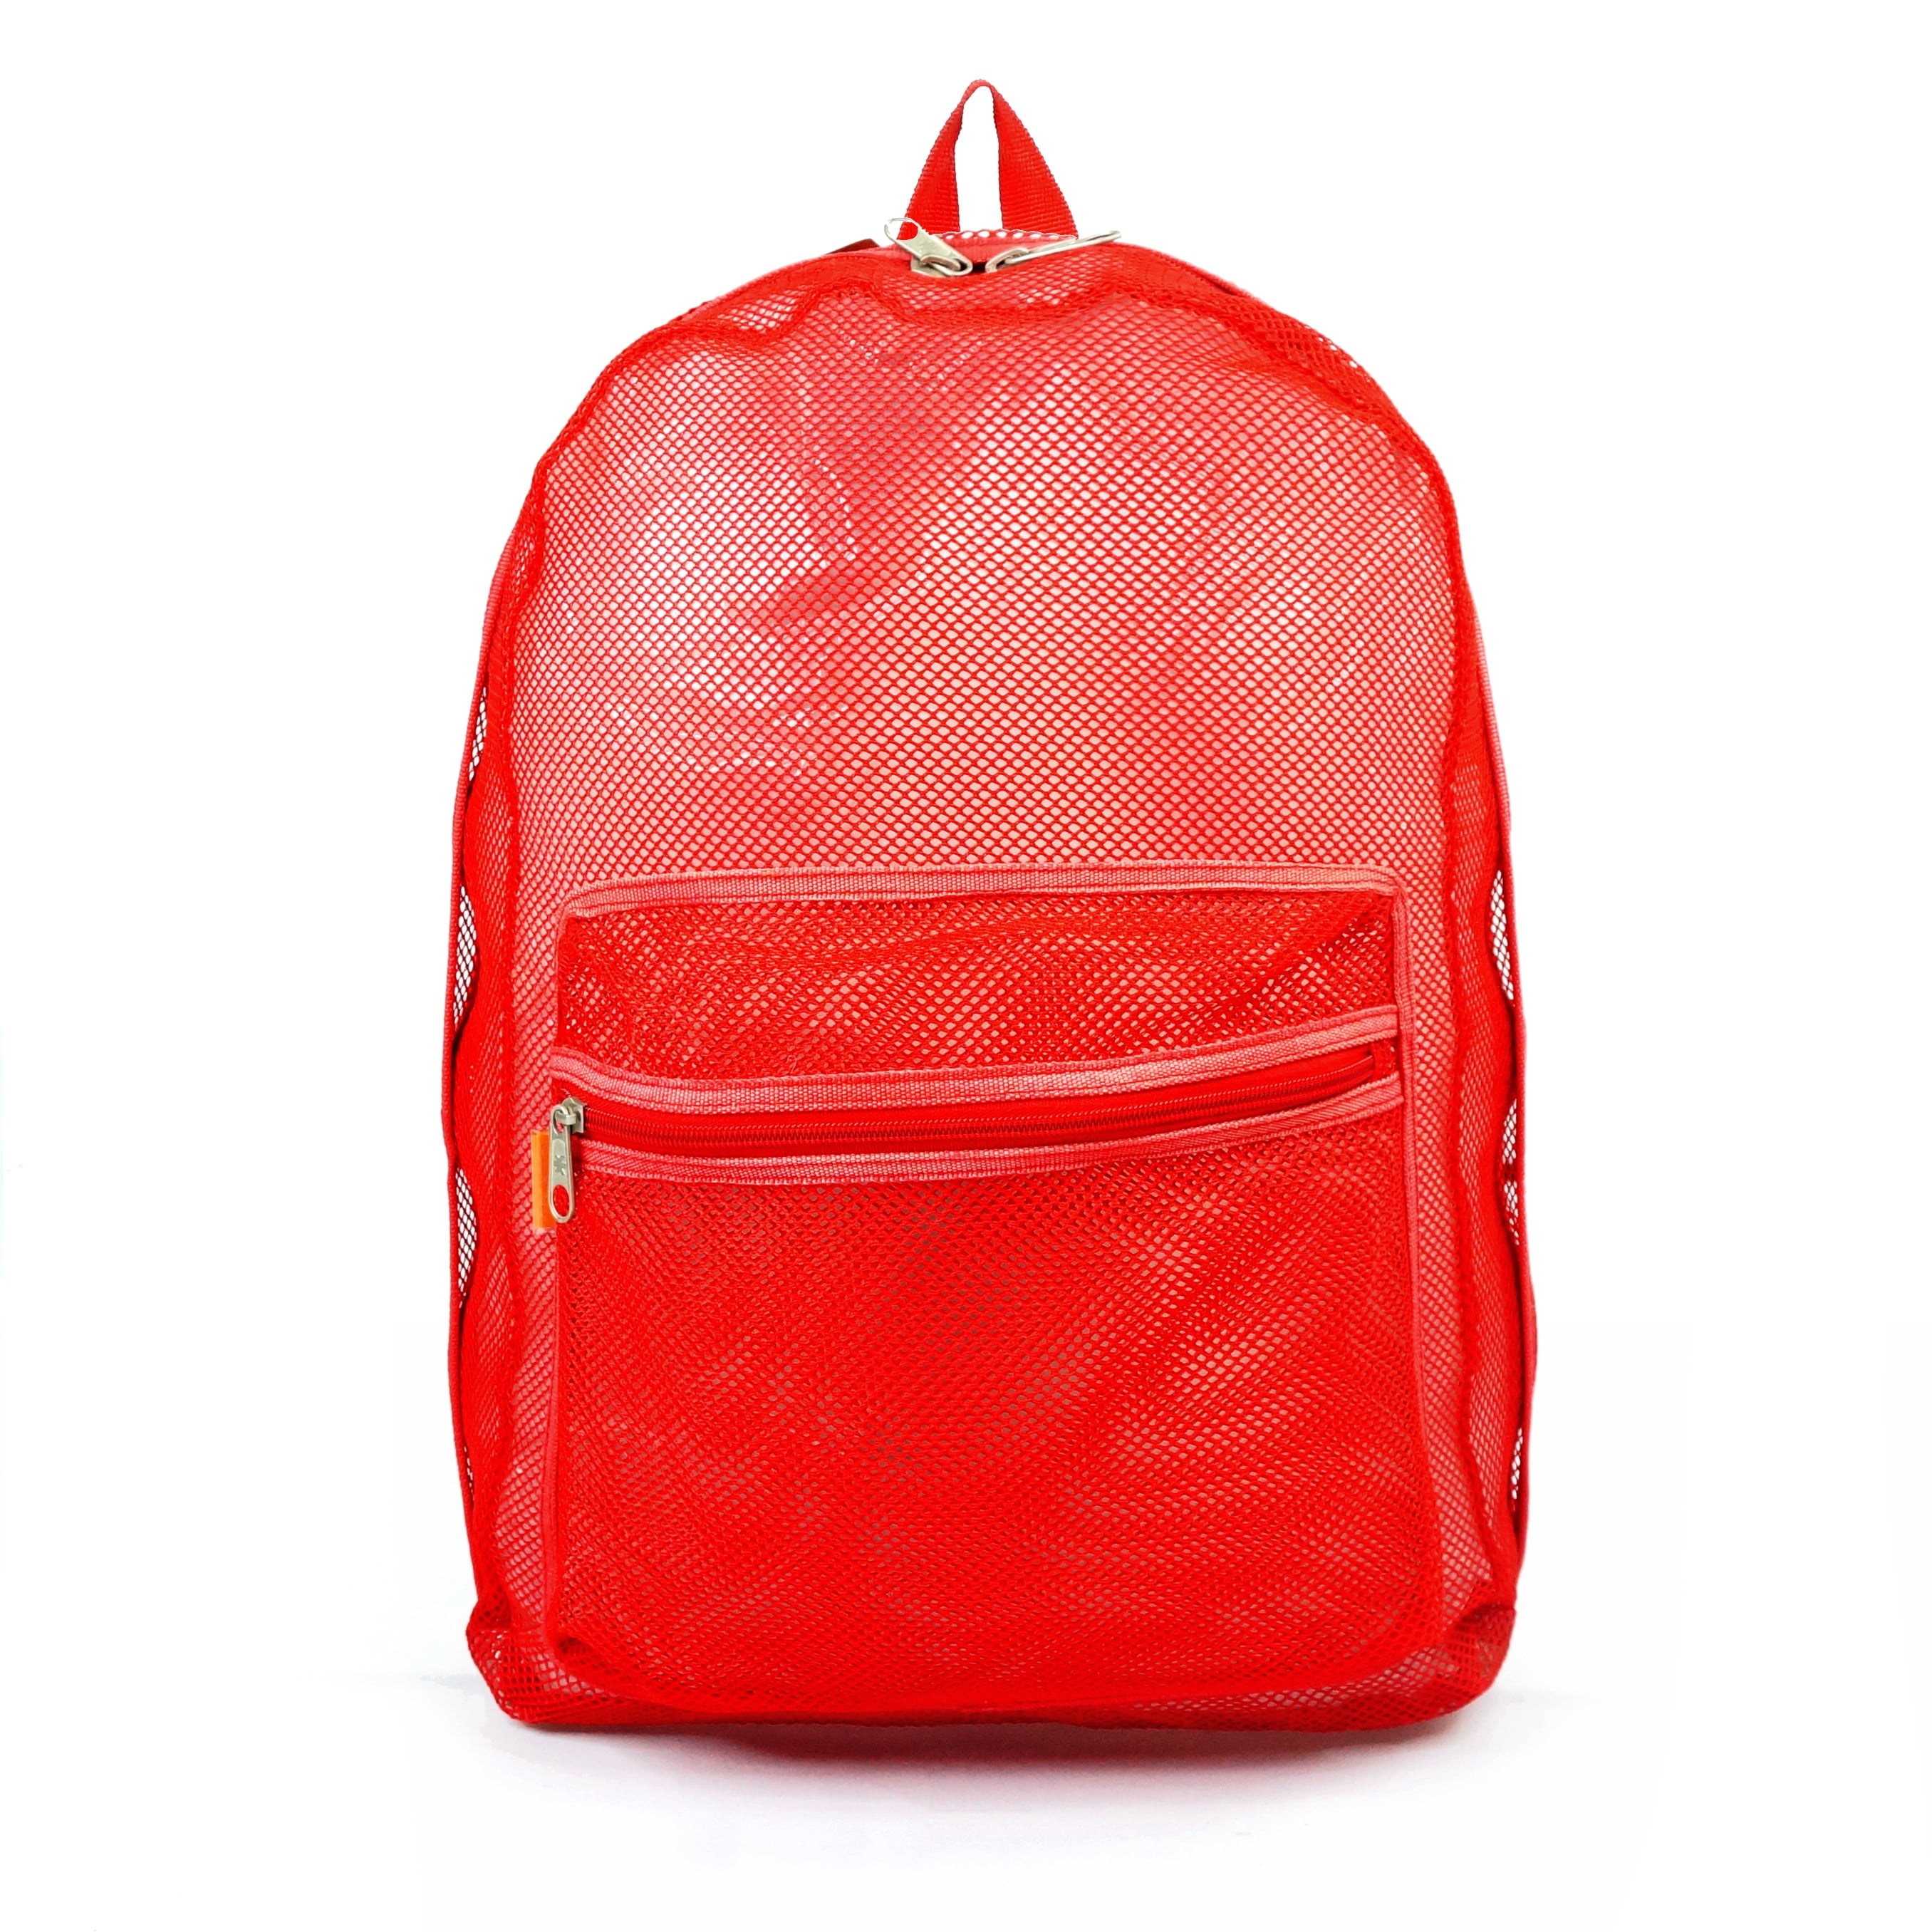 Neon Net Backpacks Party Supplies and Apparel Accessories 12 per Pack 